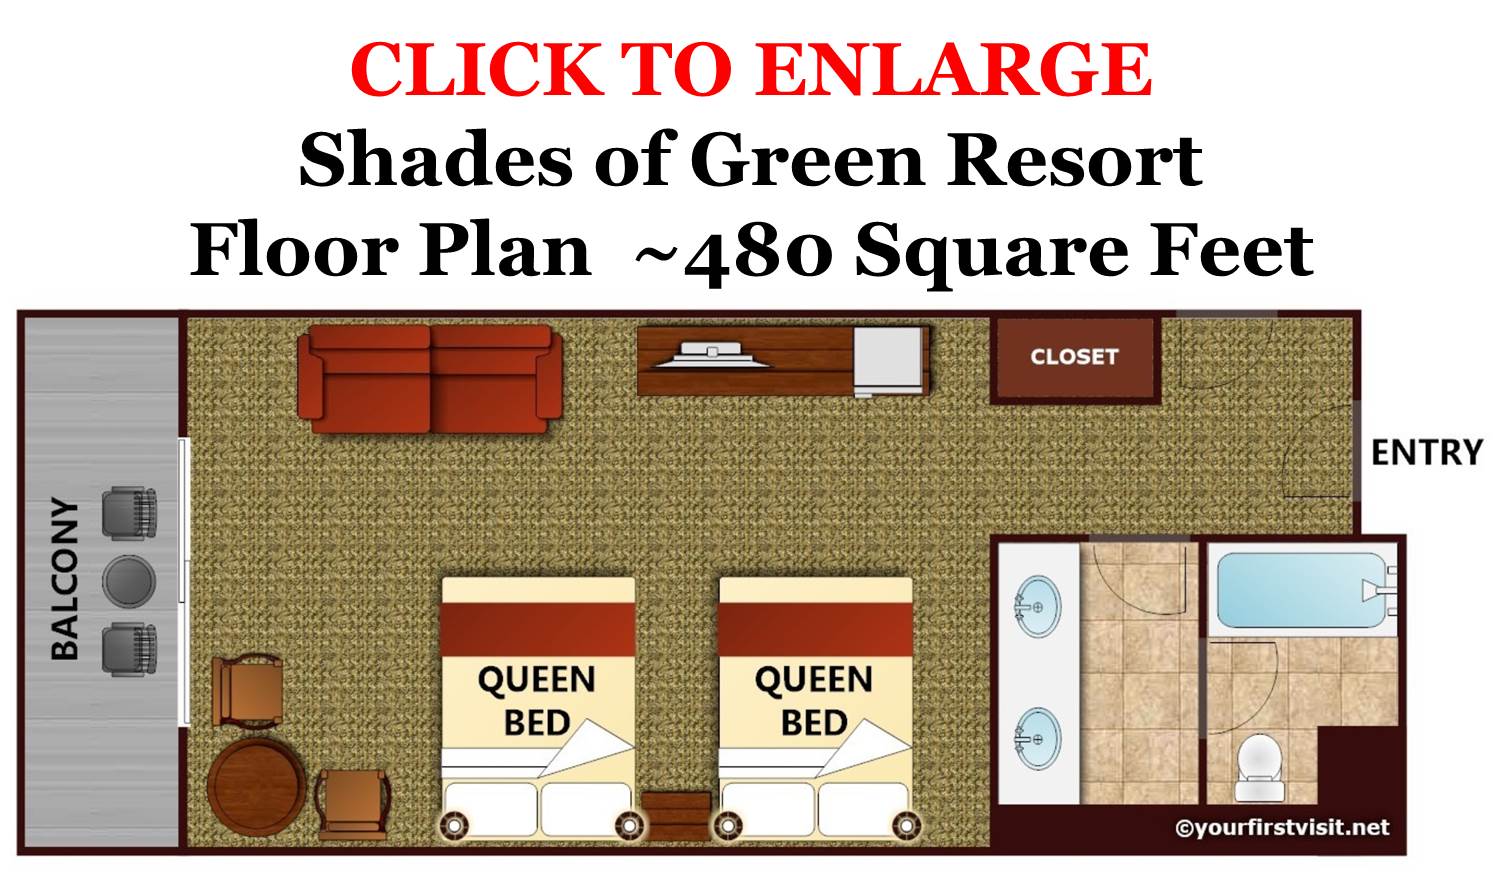 Shades of Green Floor Plan from yourfirstvisit.net